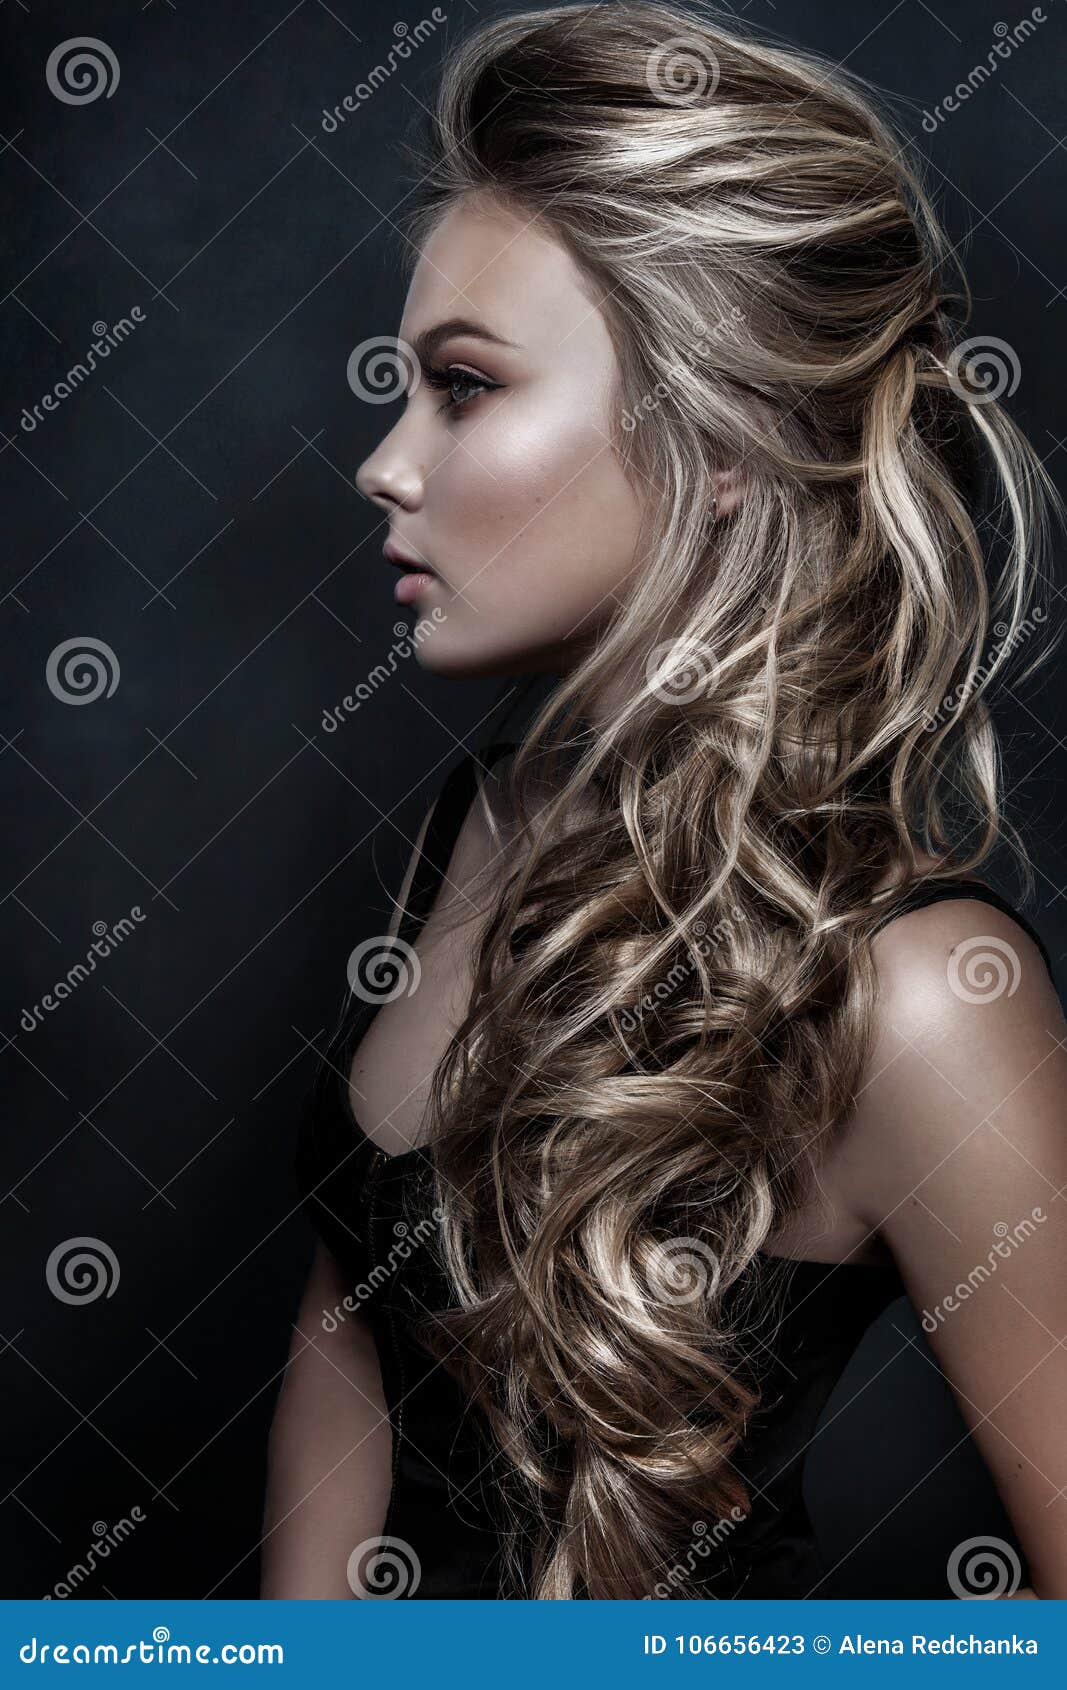 Beautiful Girl with Long Wavy Hair. Fair-haired Model with Curly Hairstyle  and Fashionable Makeup. Stock Image - Image of model, jewelry: 106656423